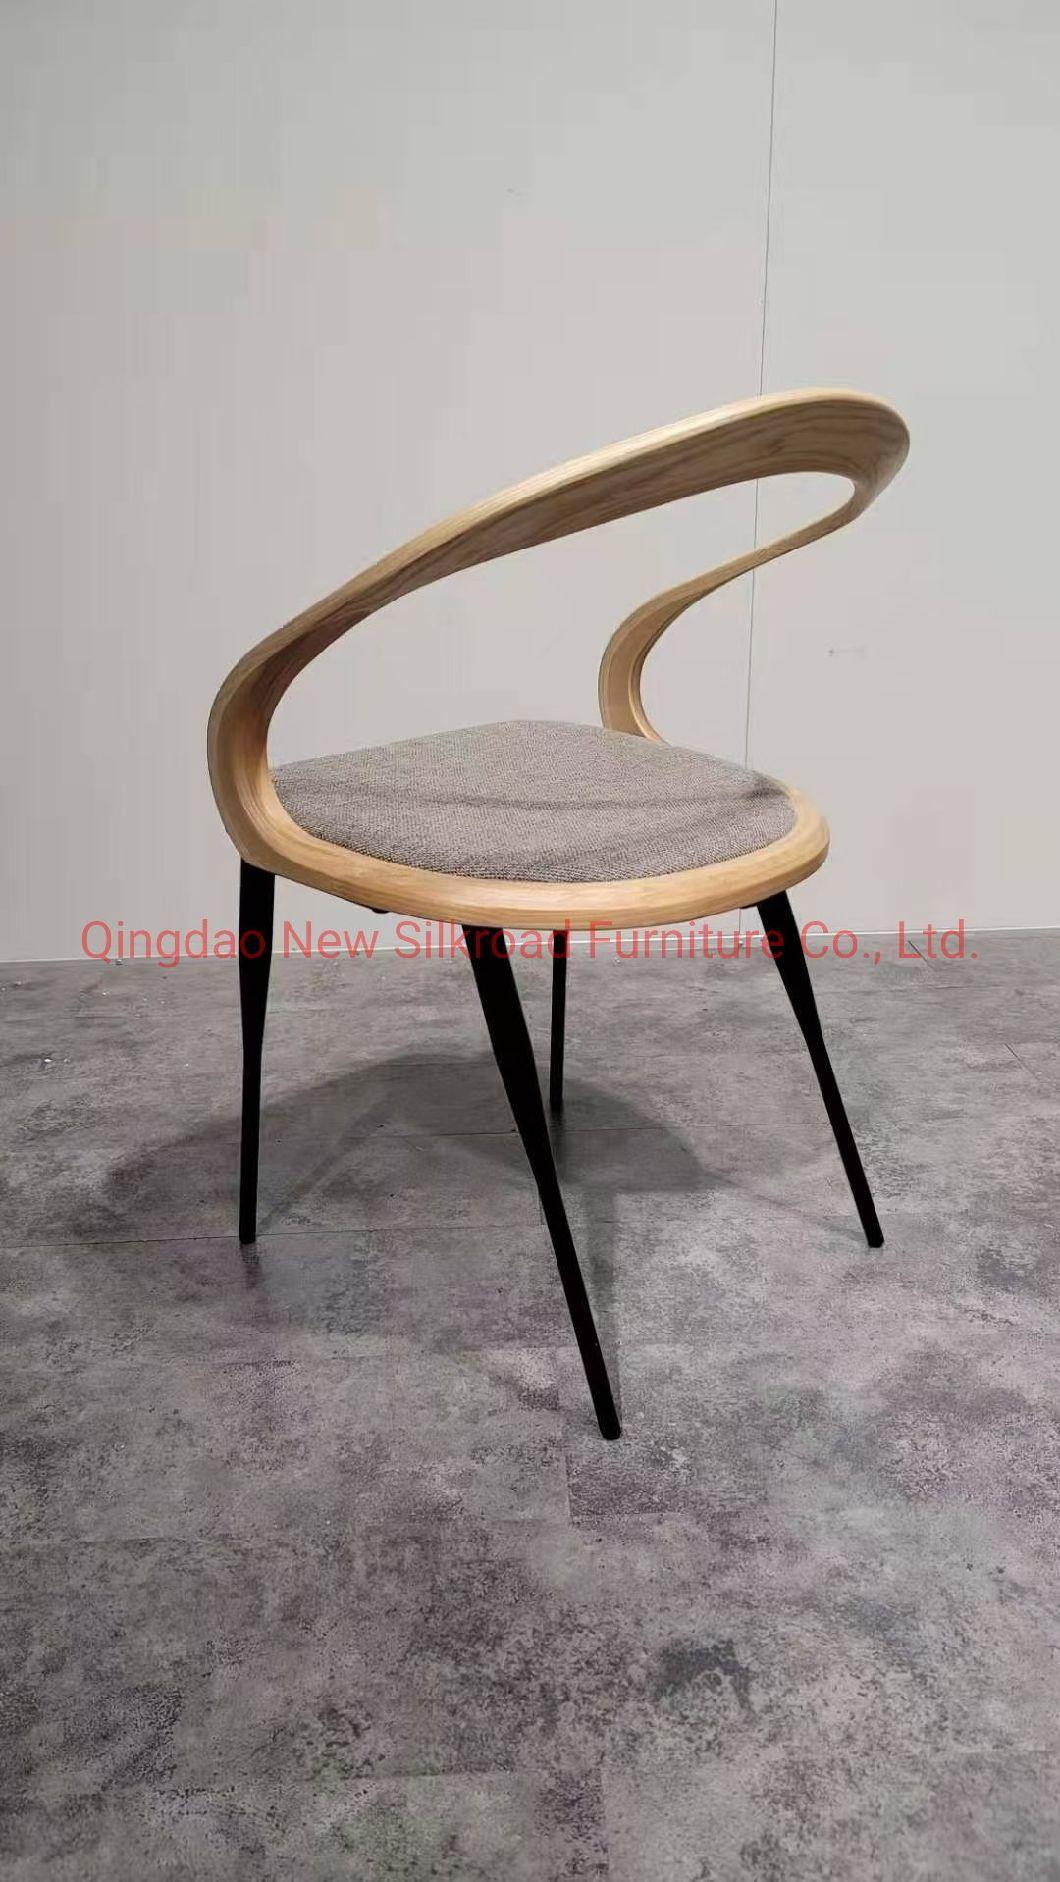 Factory Price Wholesale Modern Furniture Solid Oak/Elm Wooden Wedding Chair Banquet Chair Bent Wood Restaurant Dining Chair for Dining Room Furniture